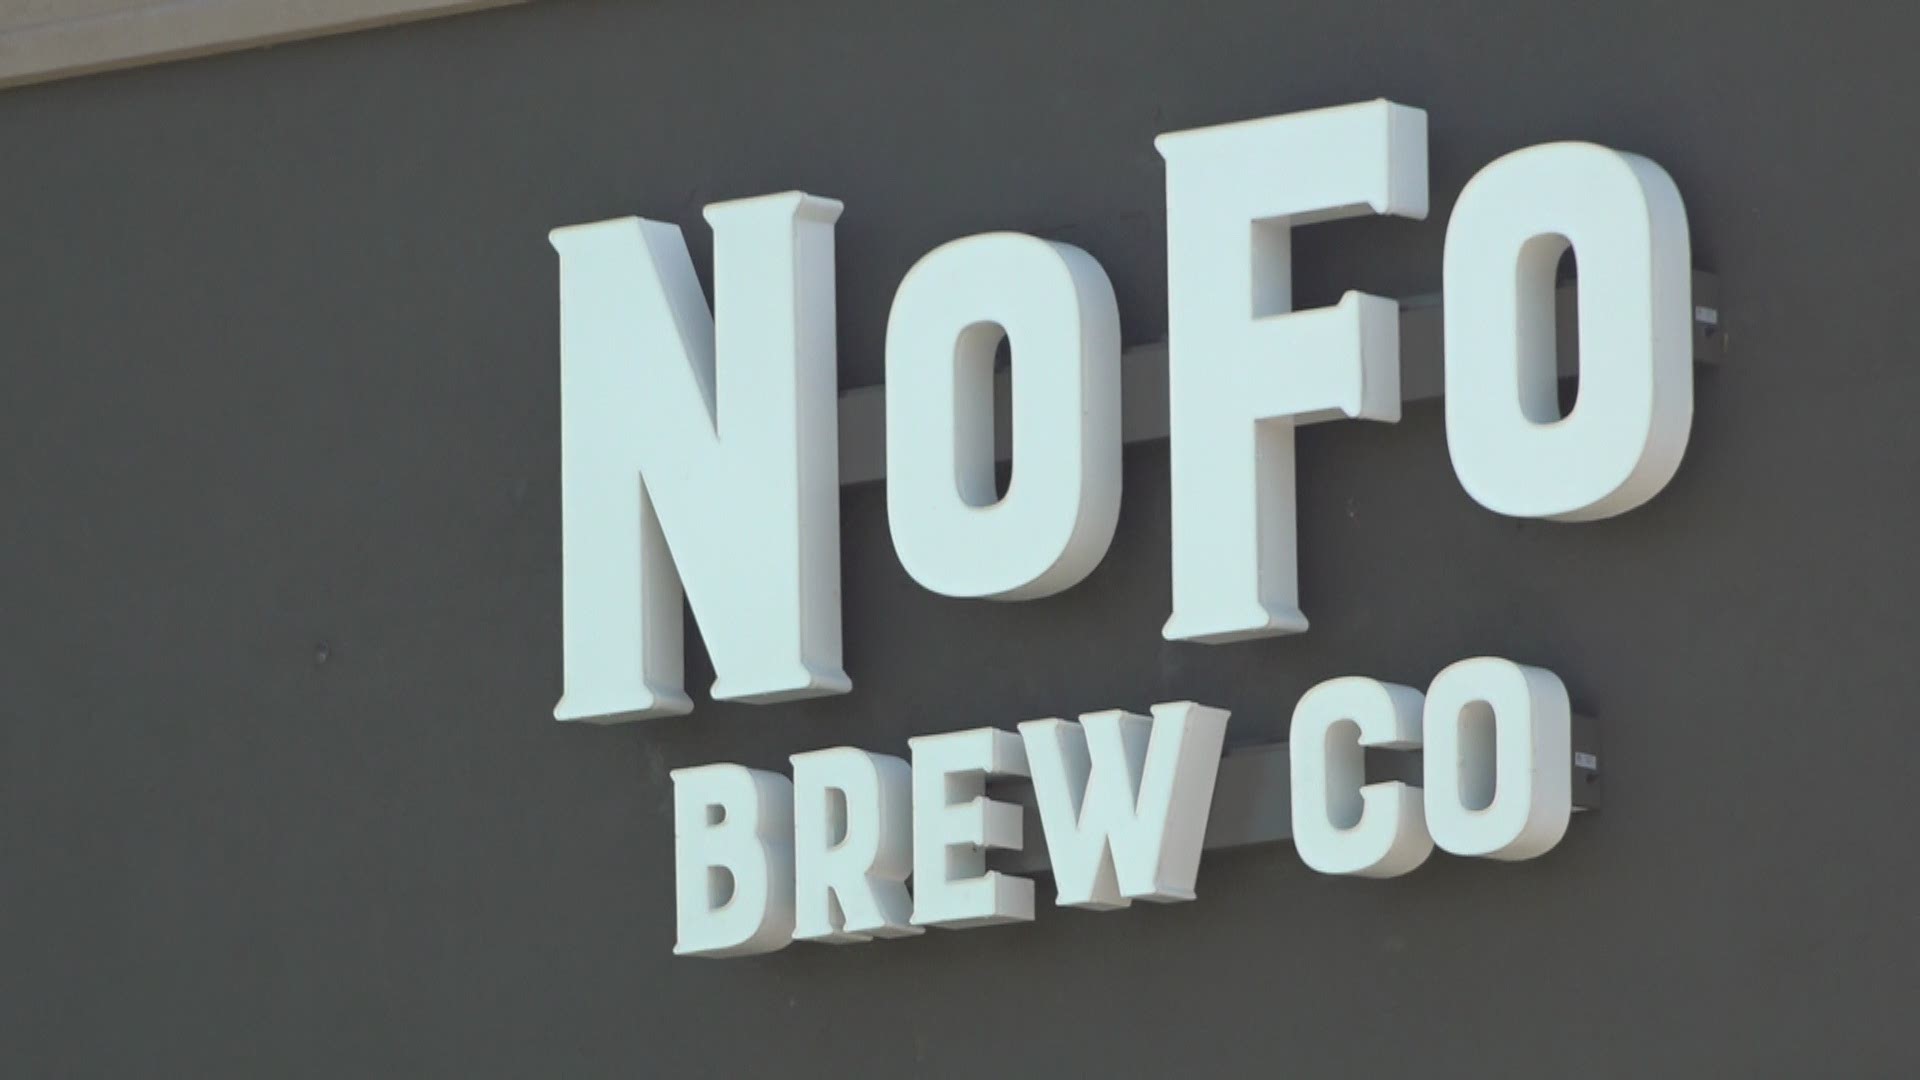 Forsyth County’s newest brewery is officially open for business with four original beers on draft.